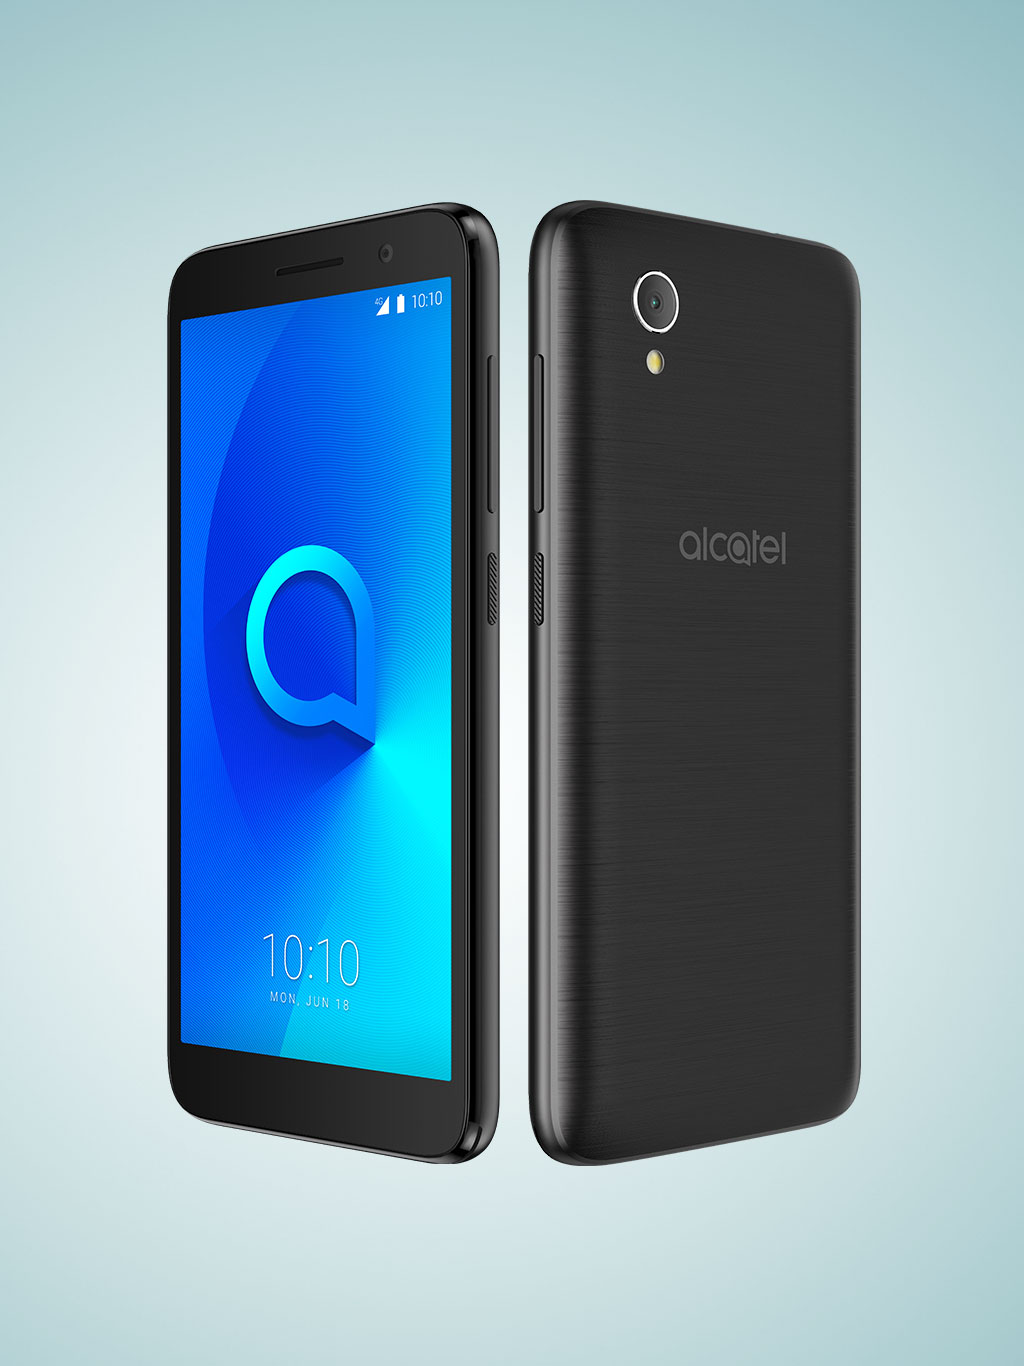 Factory Unlocked Alcatel 1 GSM Cell Phone 4G LTE 32GB 5.0 '' Android 11 V.  BK